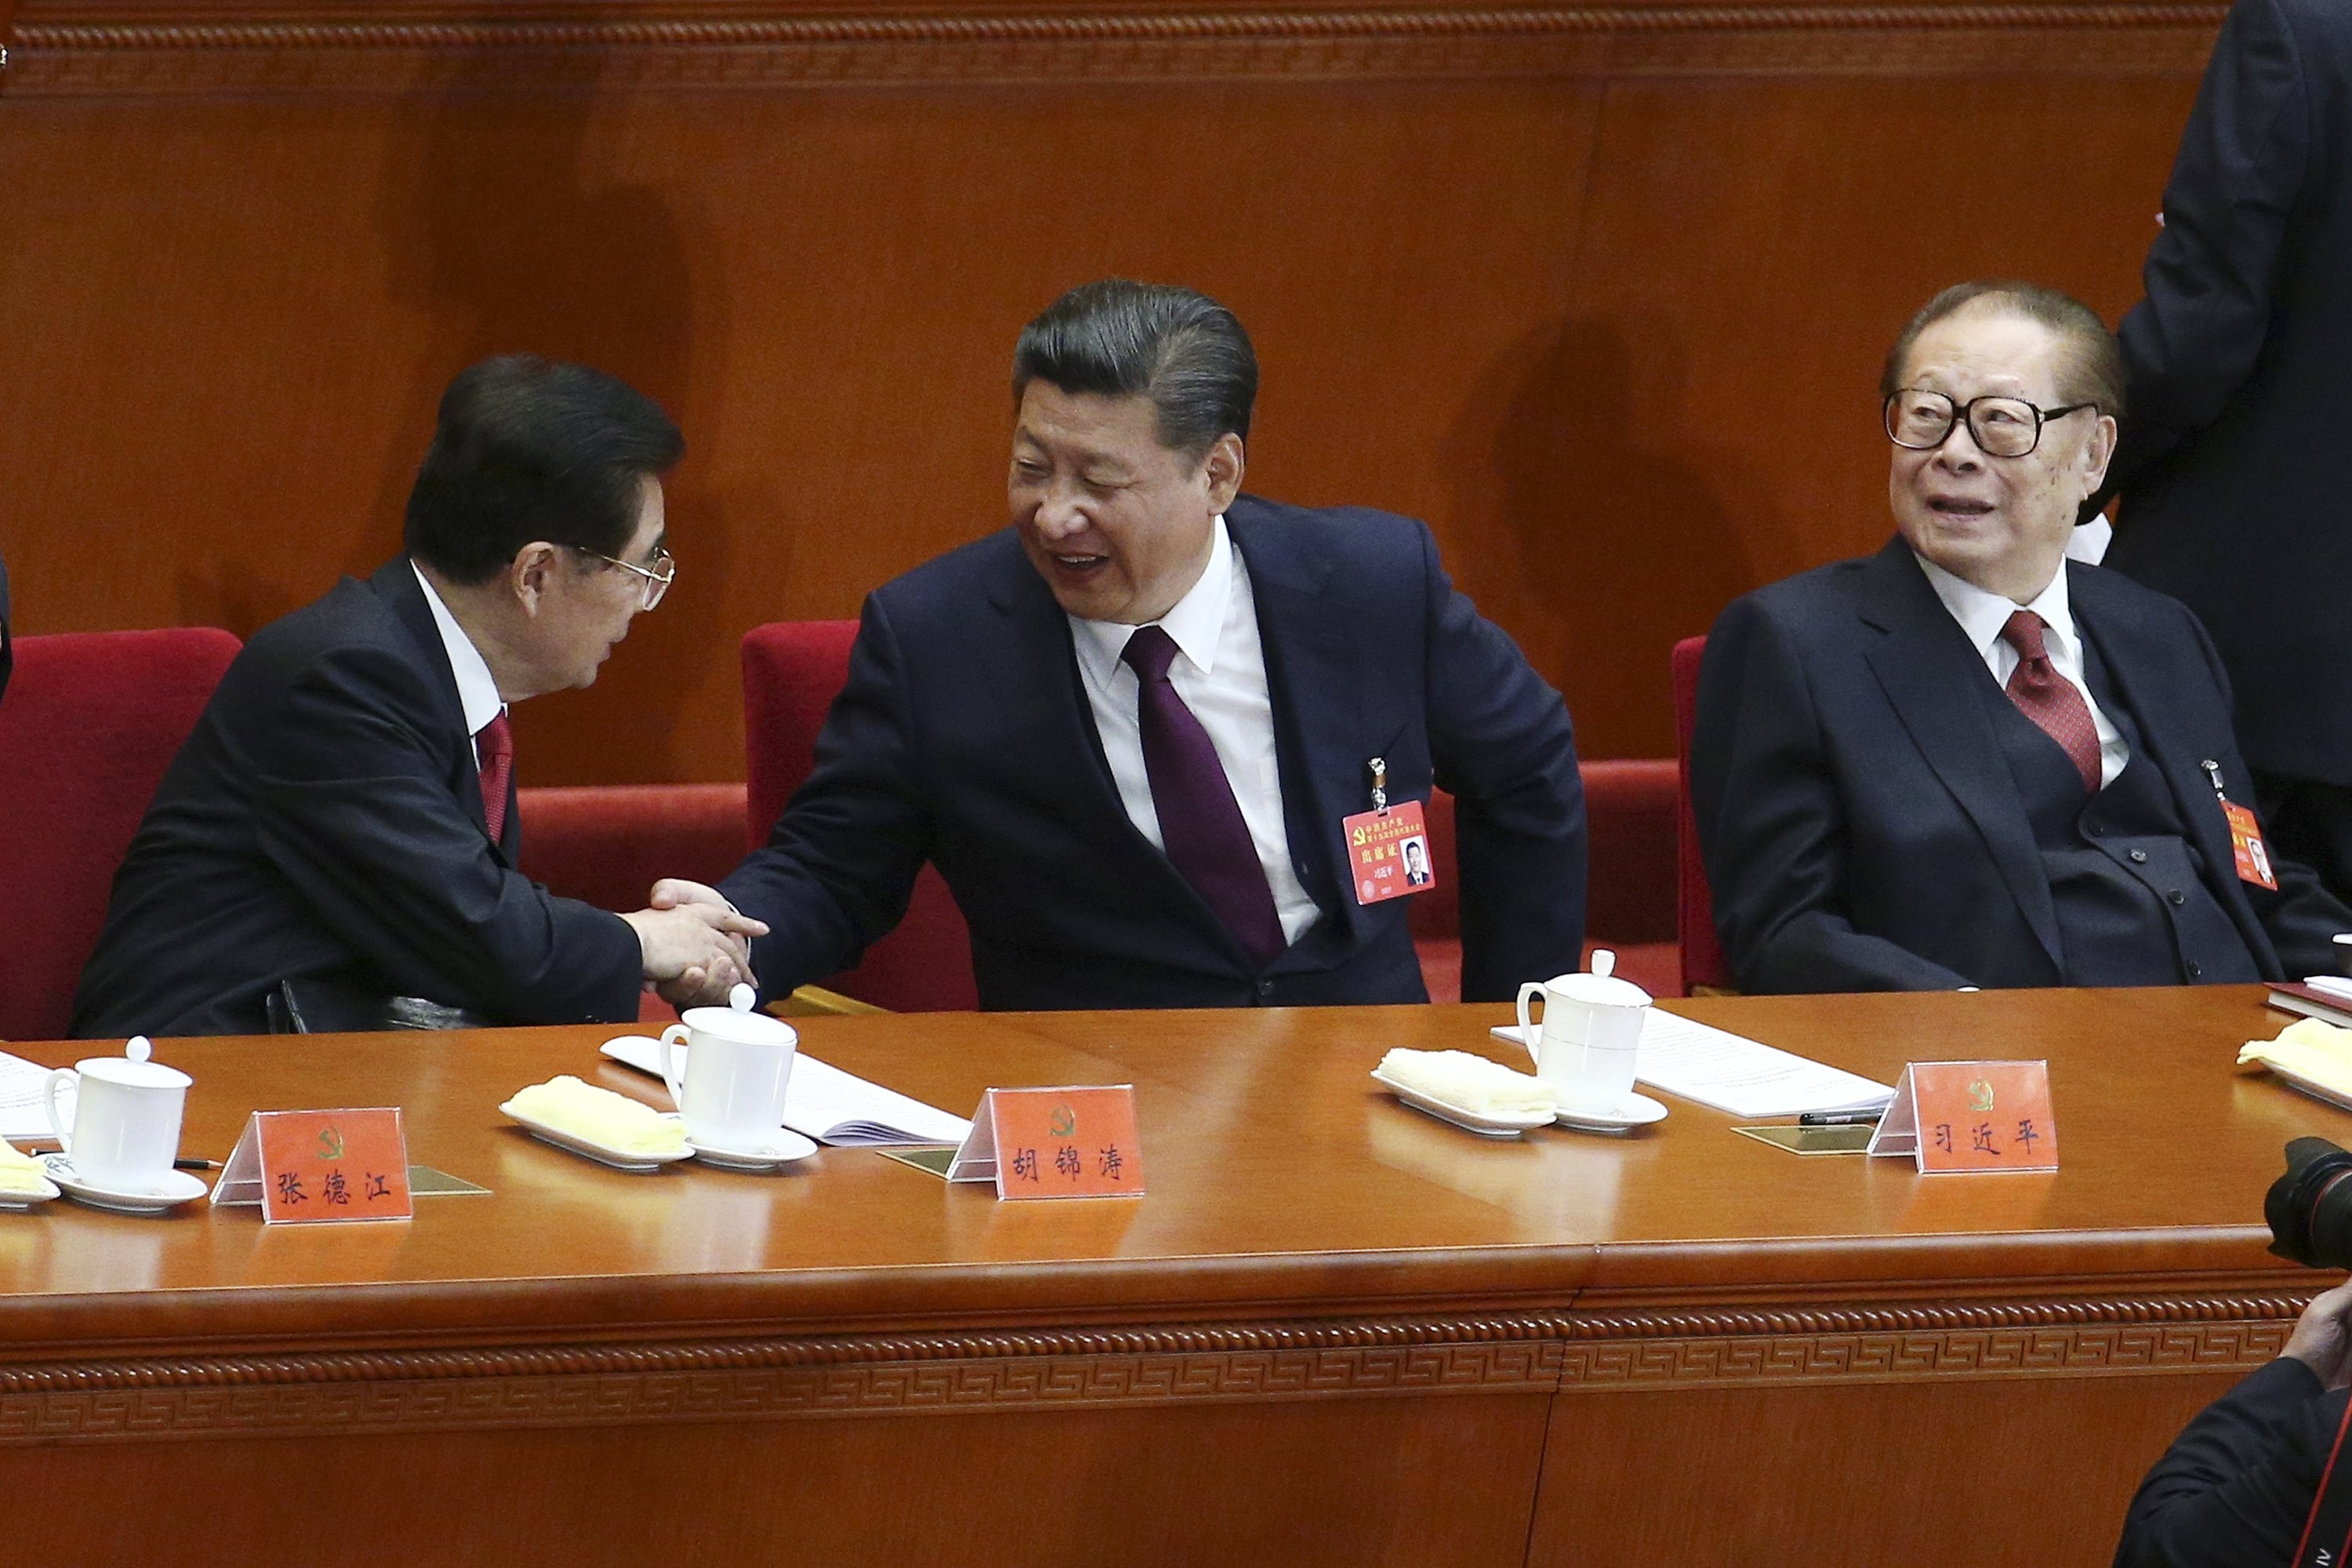 Hu Chunhua and Chen Miner unlikely to win promotion to Communist Party’s top decision-making body